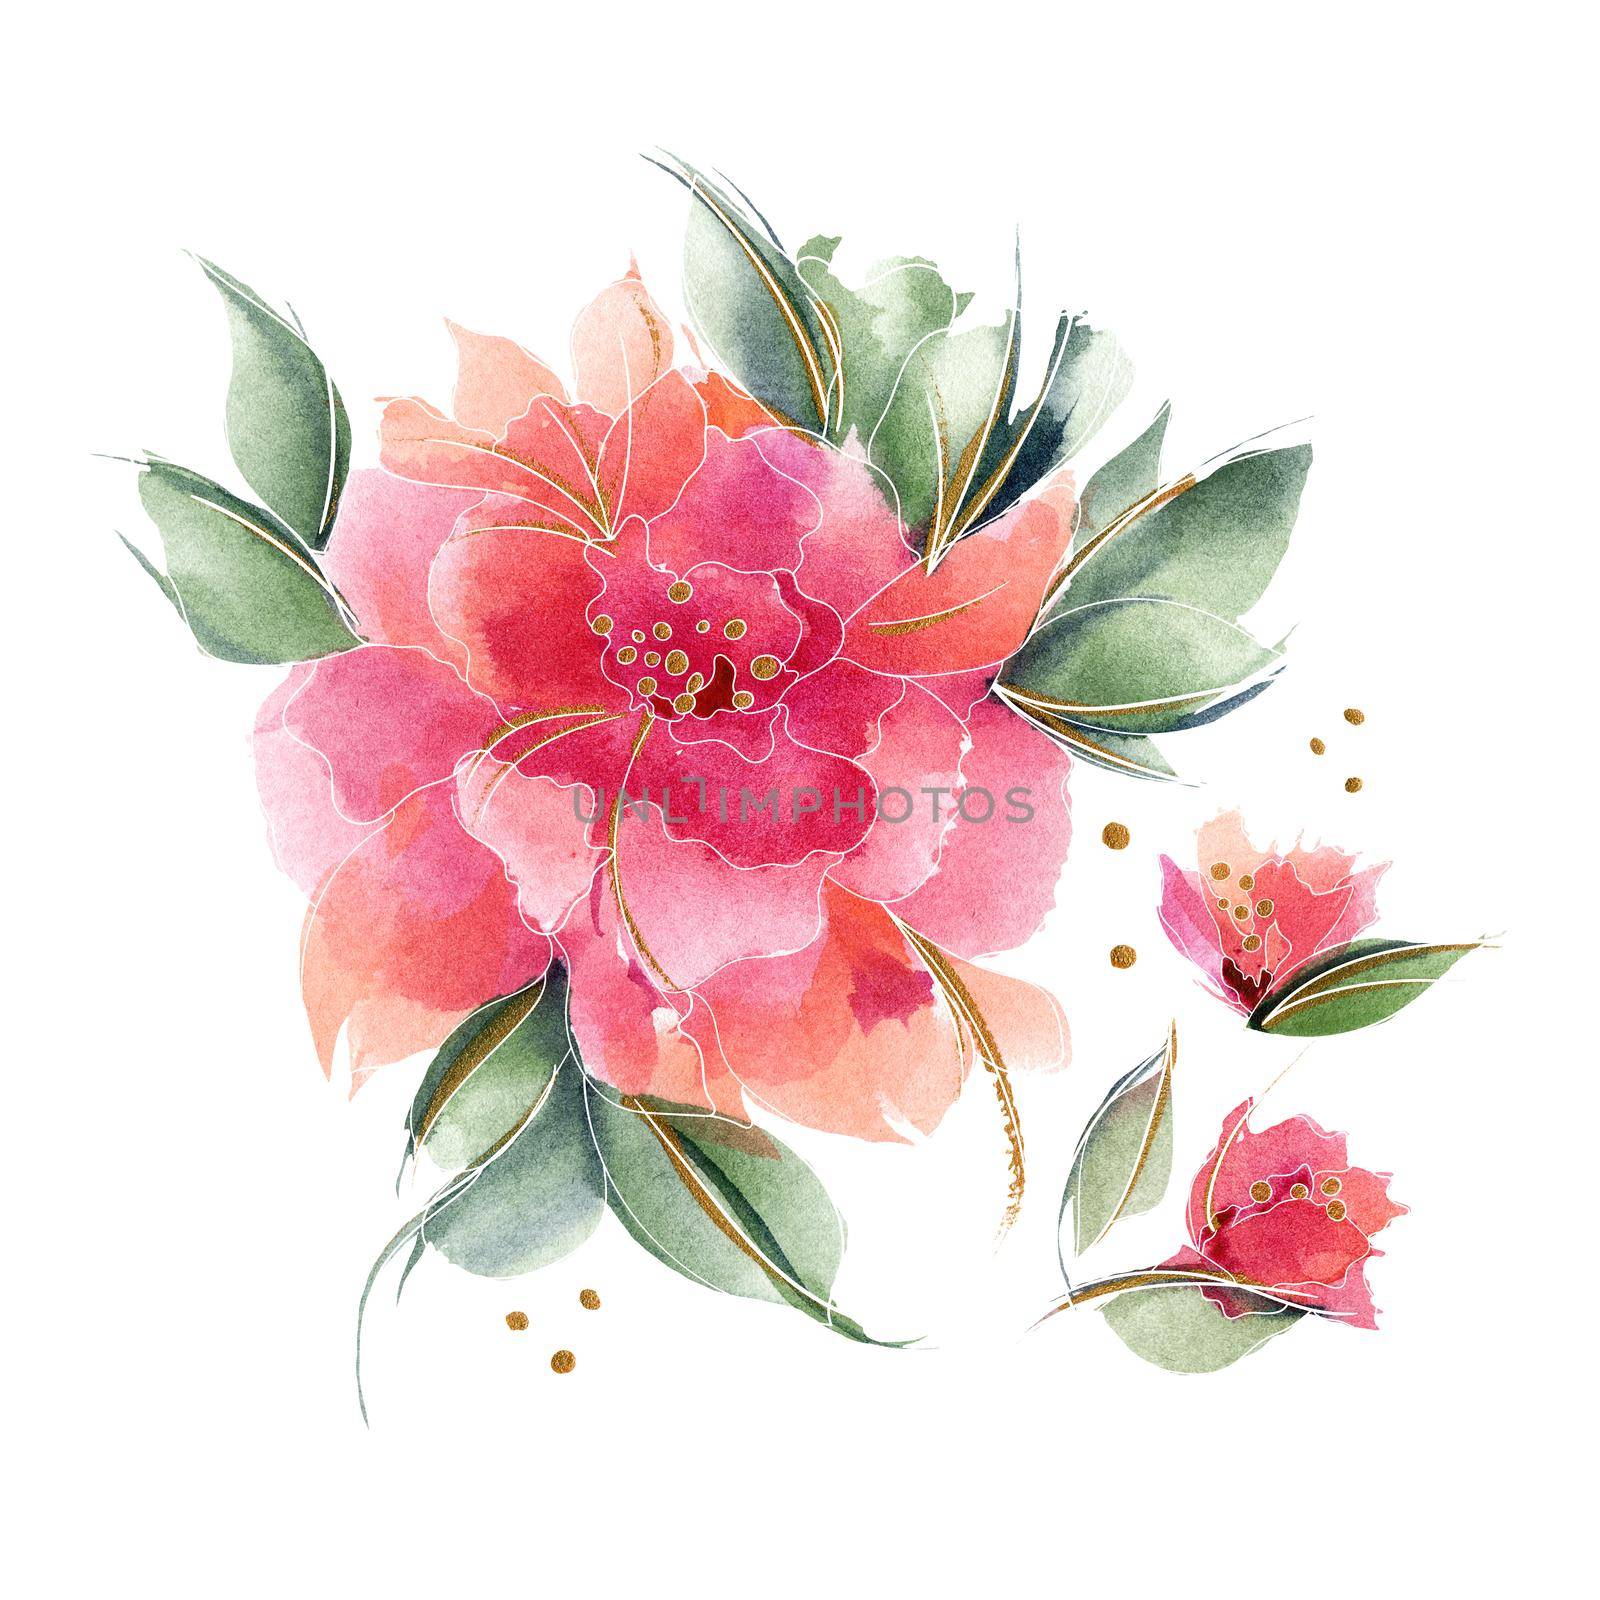 Pink floral composition with delicate fragrant rose flowers by Xeniasnowstorm